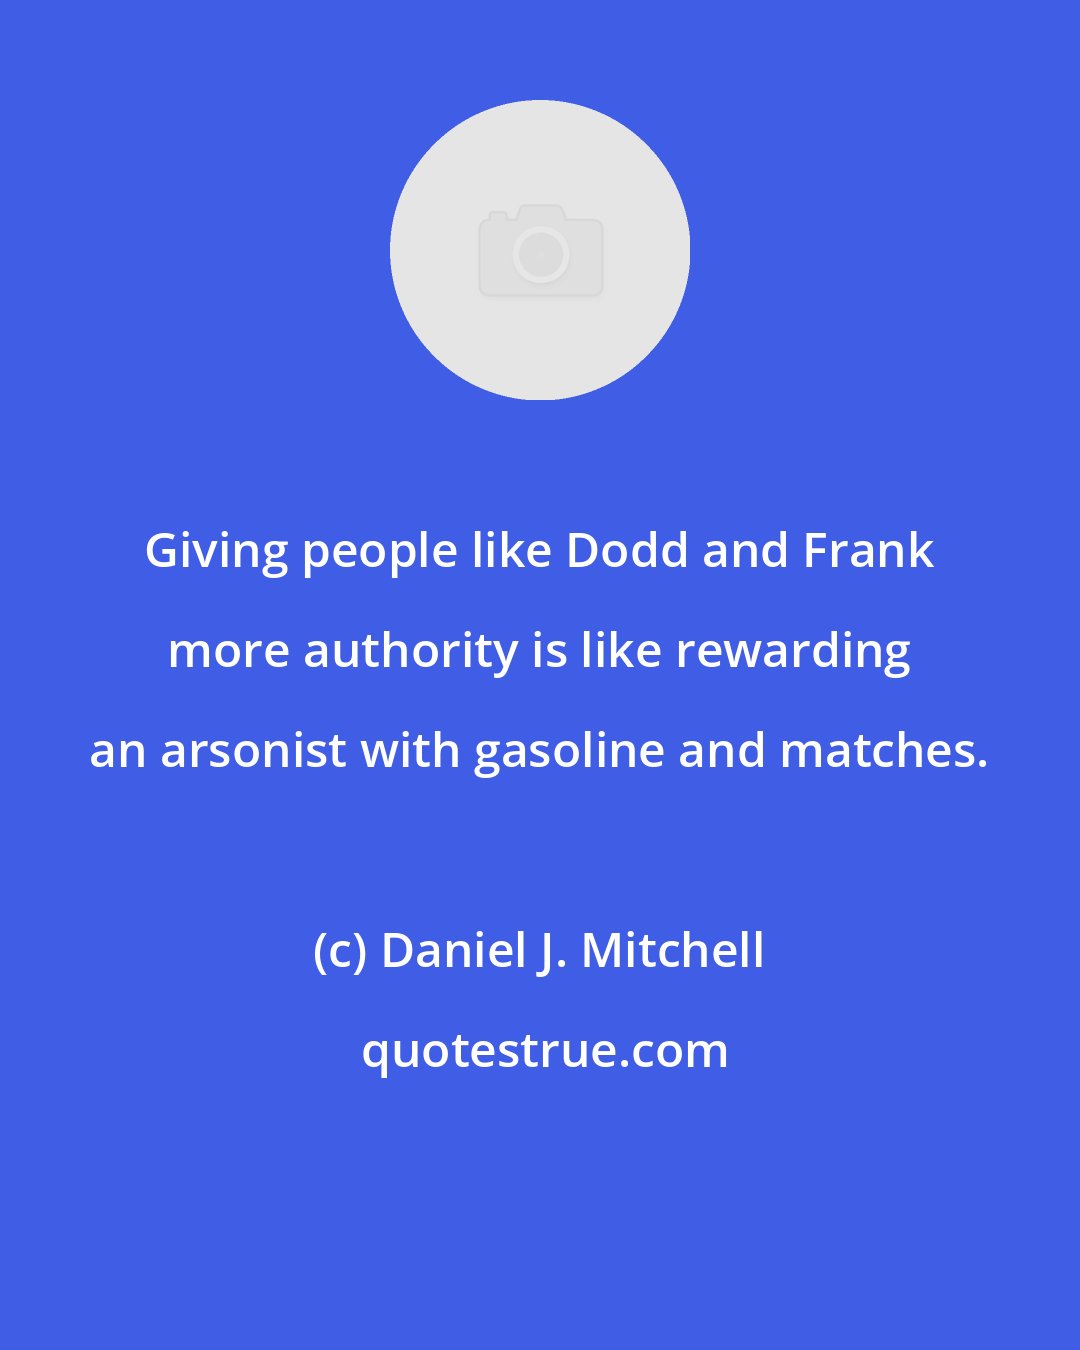 Daniel J. Mitchell: Giving people like Dodd and Frank more authority is like rewarding an arsonist with gasoline and matches.